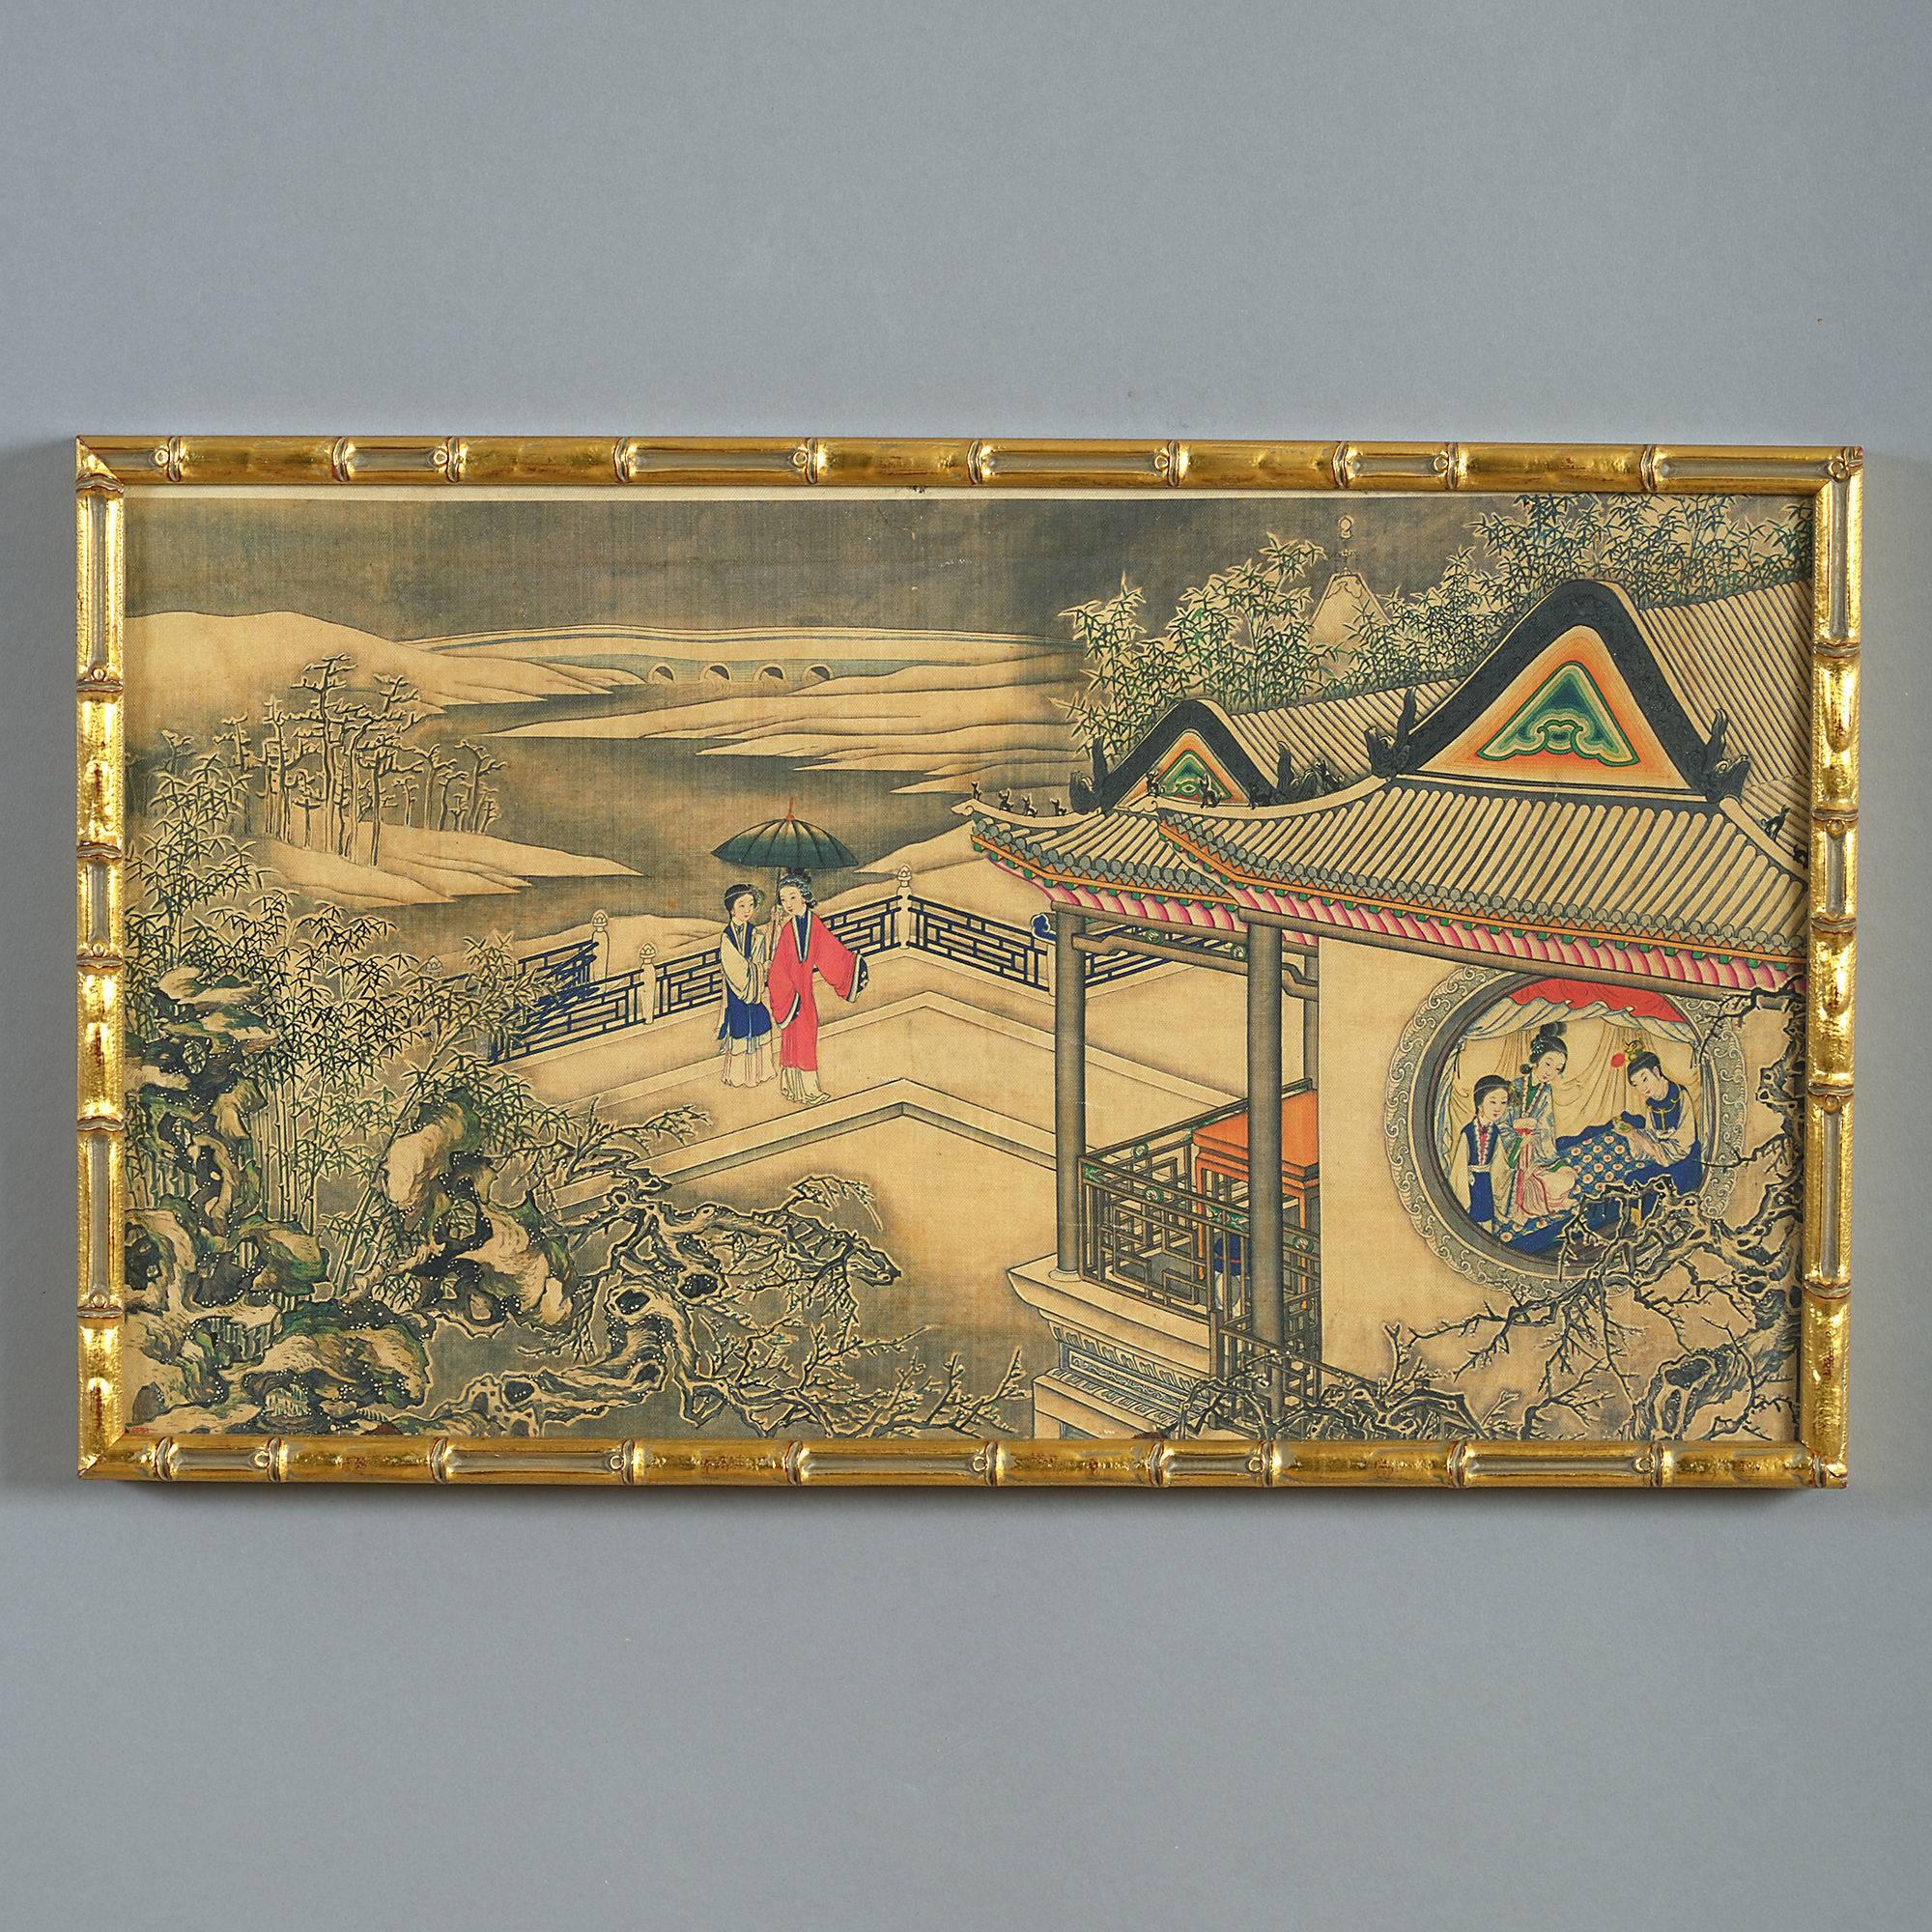 A pair of ink and watercolor landscapes depicting scenes of court life. 

These highly decorative water colors are painted on fabric and depict scenes from ‘The Dream of the Red Chamber’ - A mythical account of life during the Qing dynasty. These